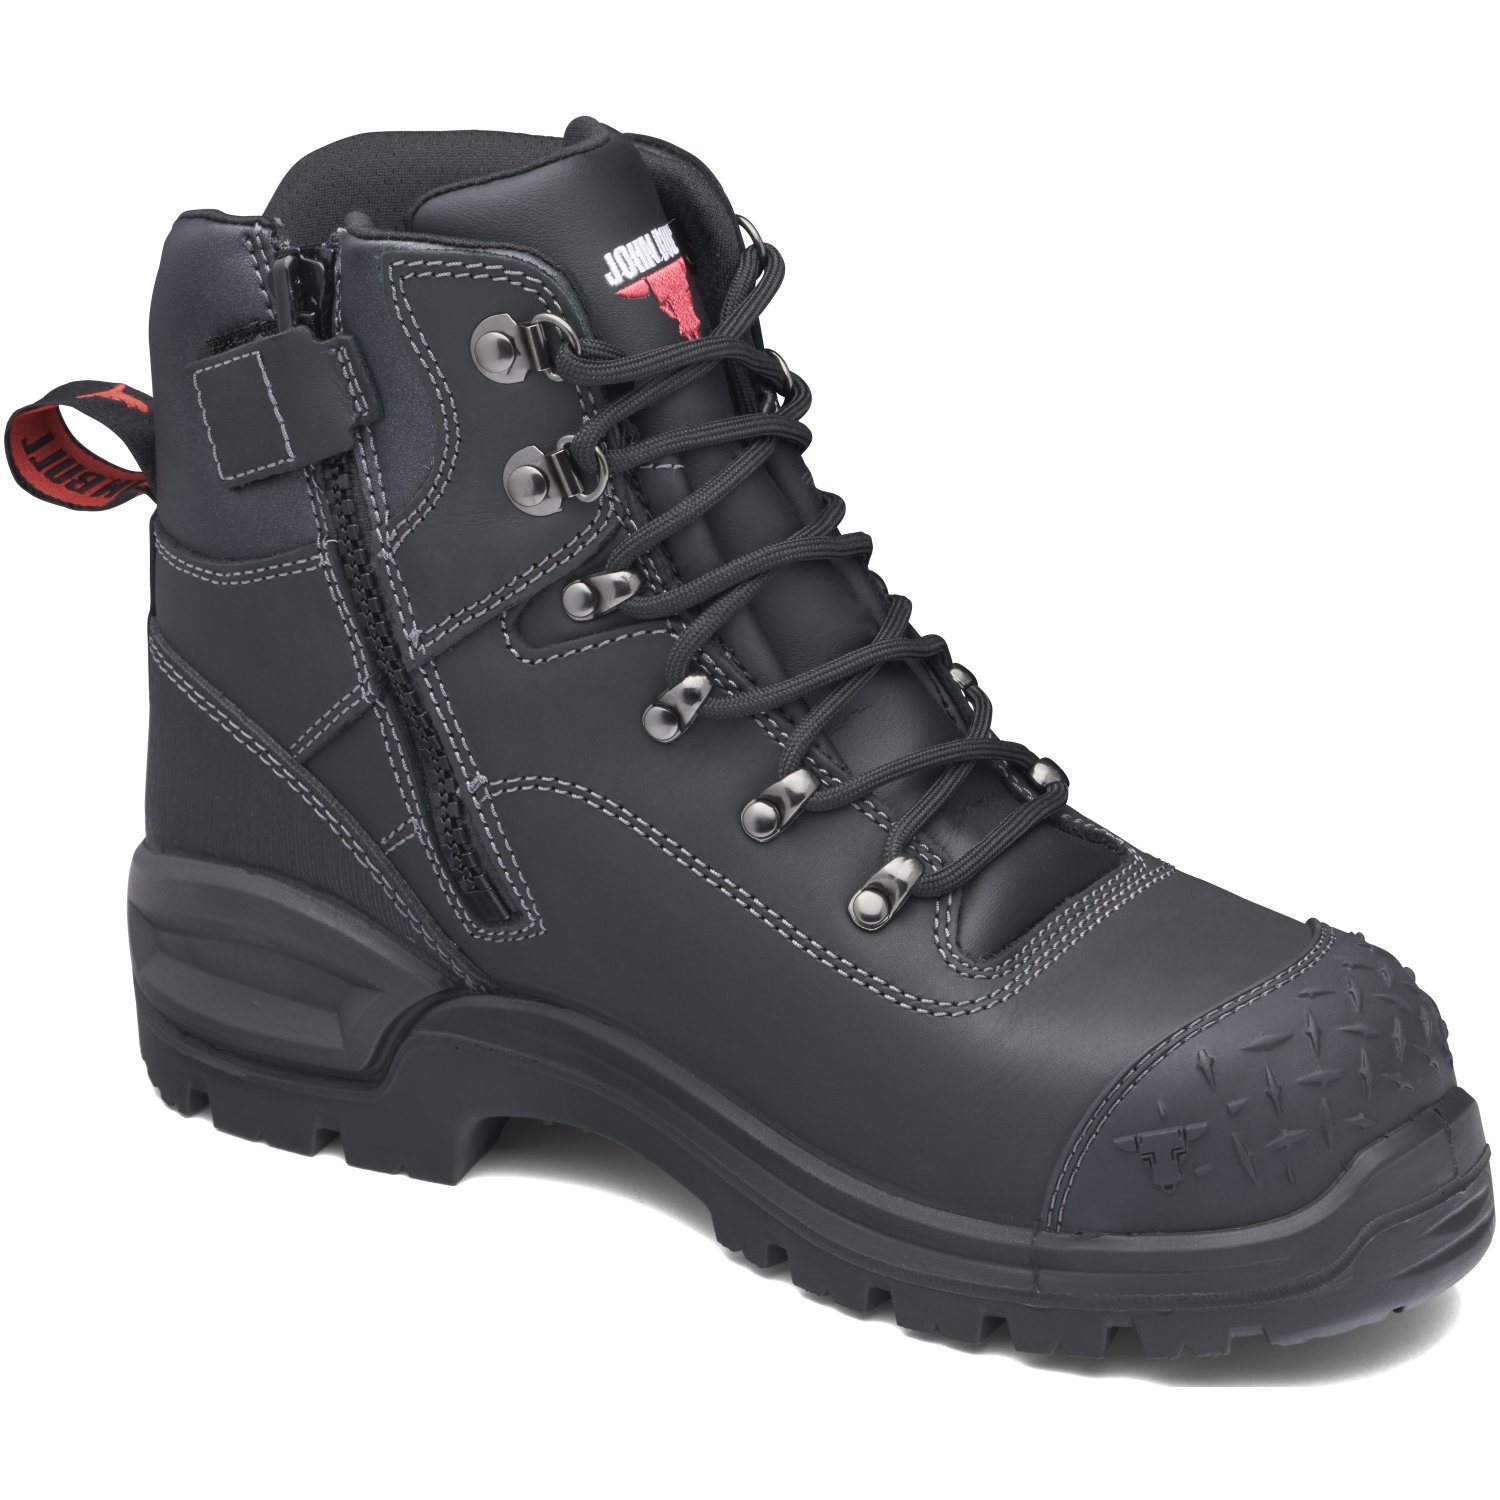 John Bull Crow 2.0 Cushion Core Lace Up/Zip Safety Boot With Toe Guard